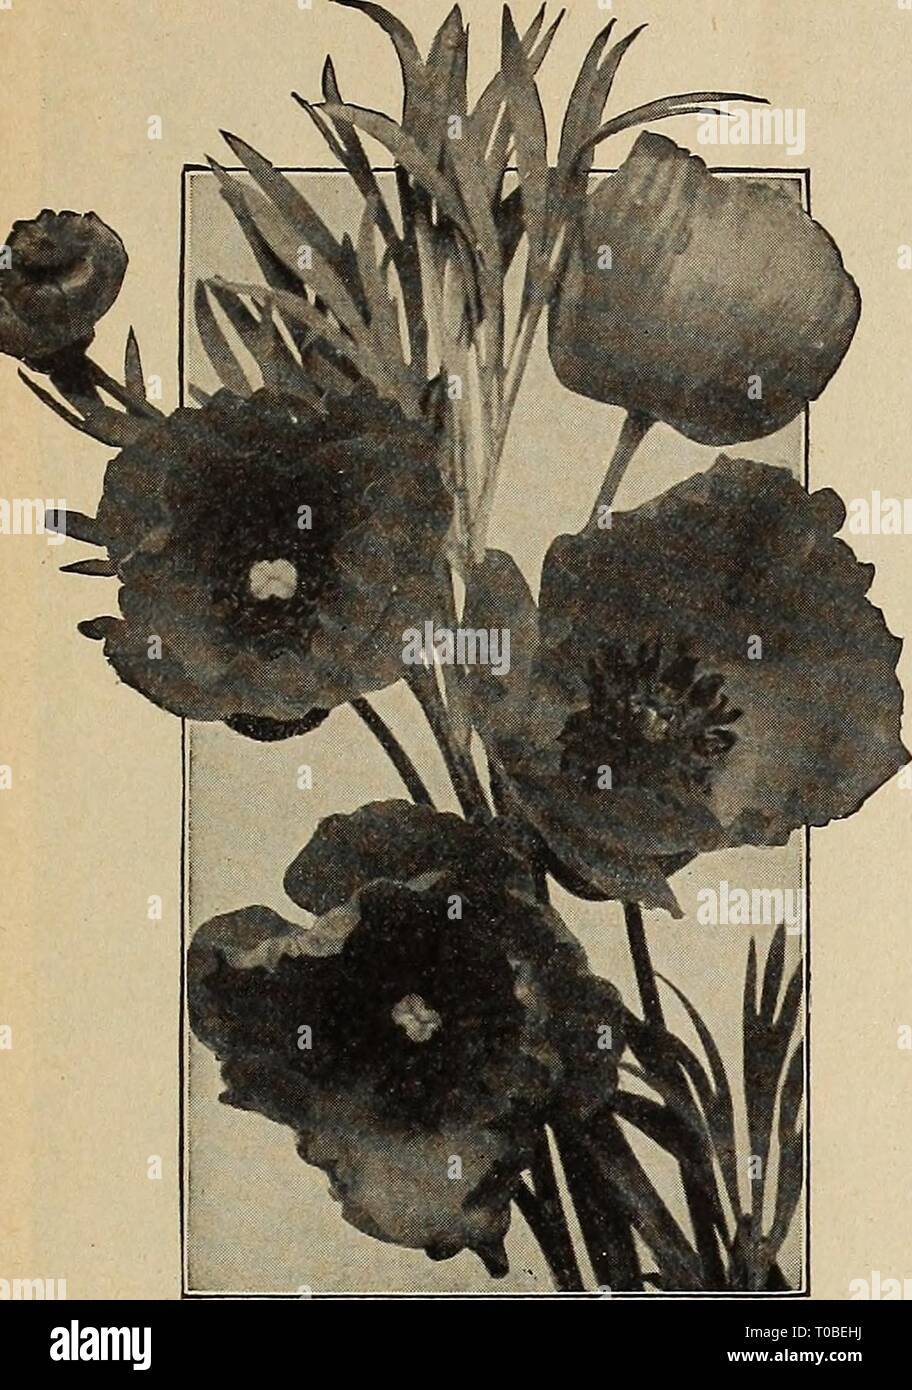 Dreer's garden book 1920 (1920) Dreer's garden book 1920 dreersgardenbook1920henr Year: 1920  45    HUNNKMANNIA HONESTY I]tIP.A. jnE&lt;3*S (Sultan's or Zanzibar Balsam) Charming plants for the decoration of the greenhouse or dinner table, producing bright, waxy-looking flowers profusely and almost continuously. The young seedlings should be carefully handled, as they are exceedingly brittle at the outset. per pkt. 2842 Sultani. Flowers of brilliant rosy-scarlet color 25 2845 Holstii Hybrids. Forms strong bushy plants, about 2 feet high, covered with attractive flowers; when grown as pot plant Stock Photo